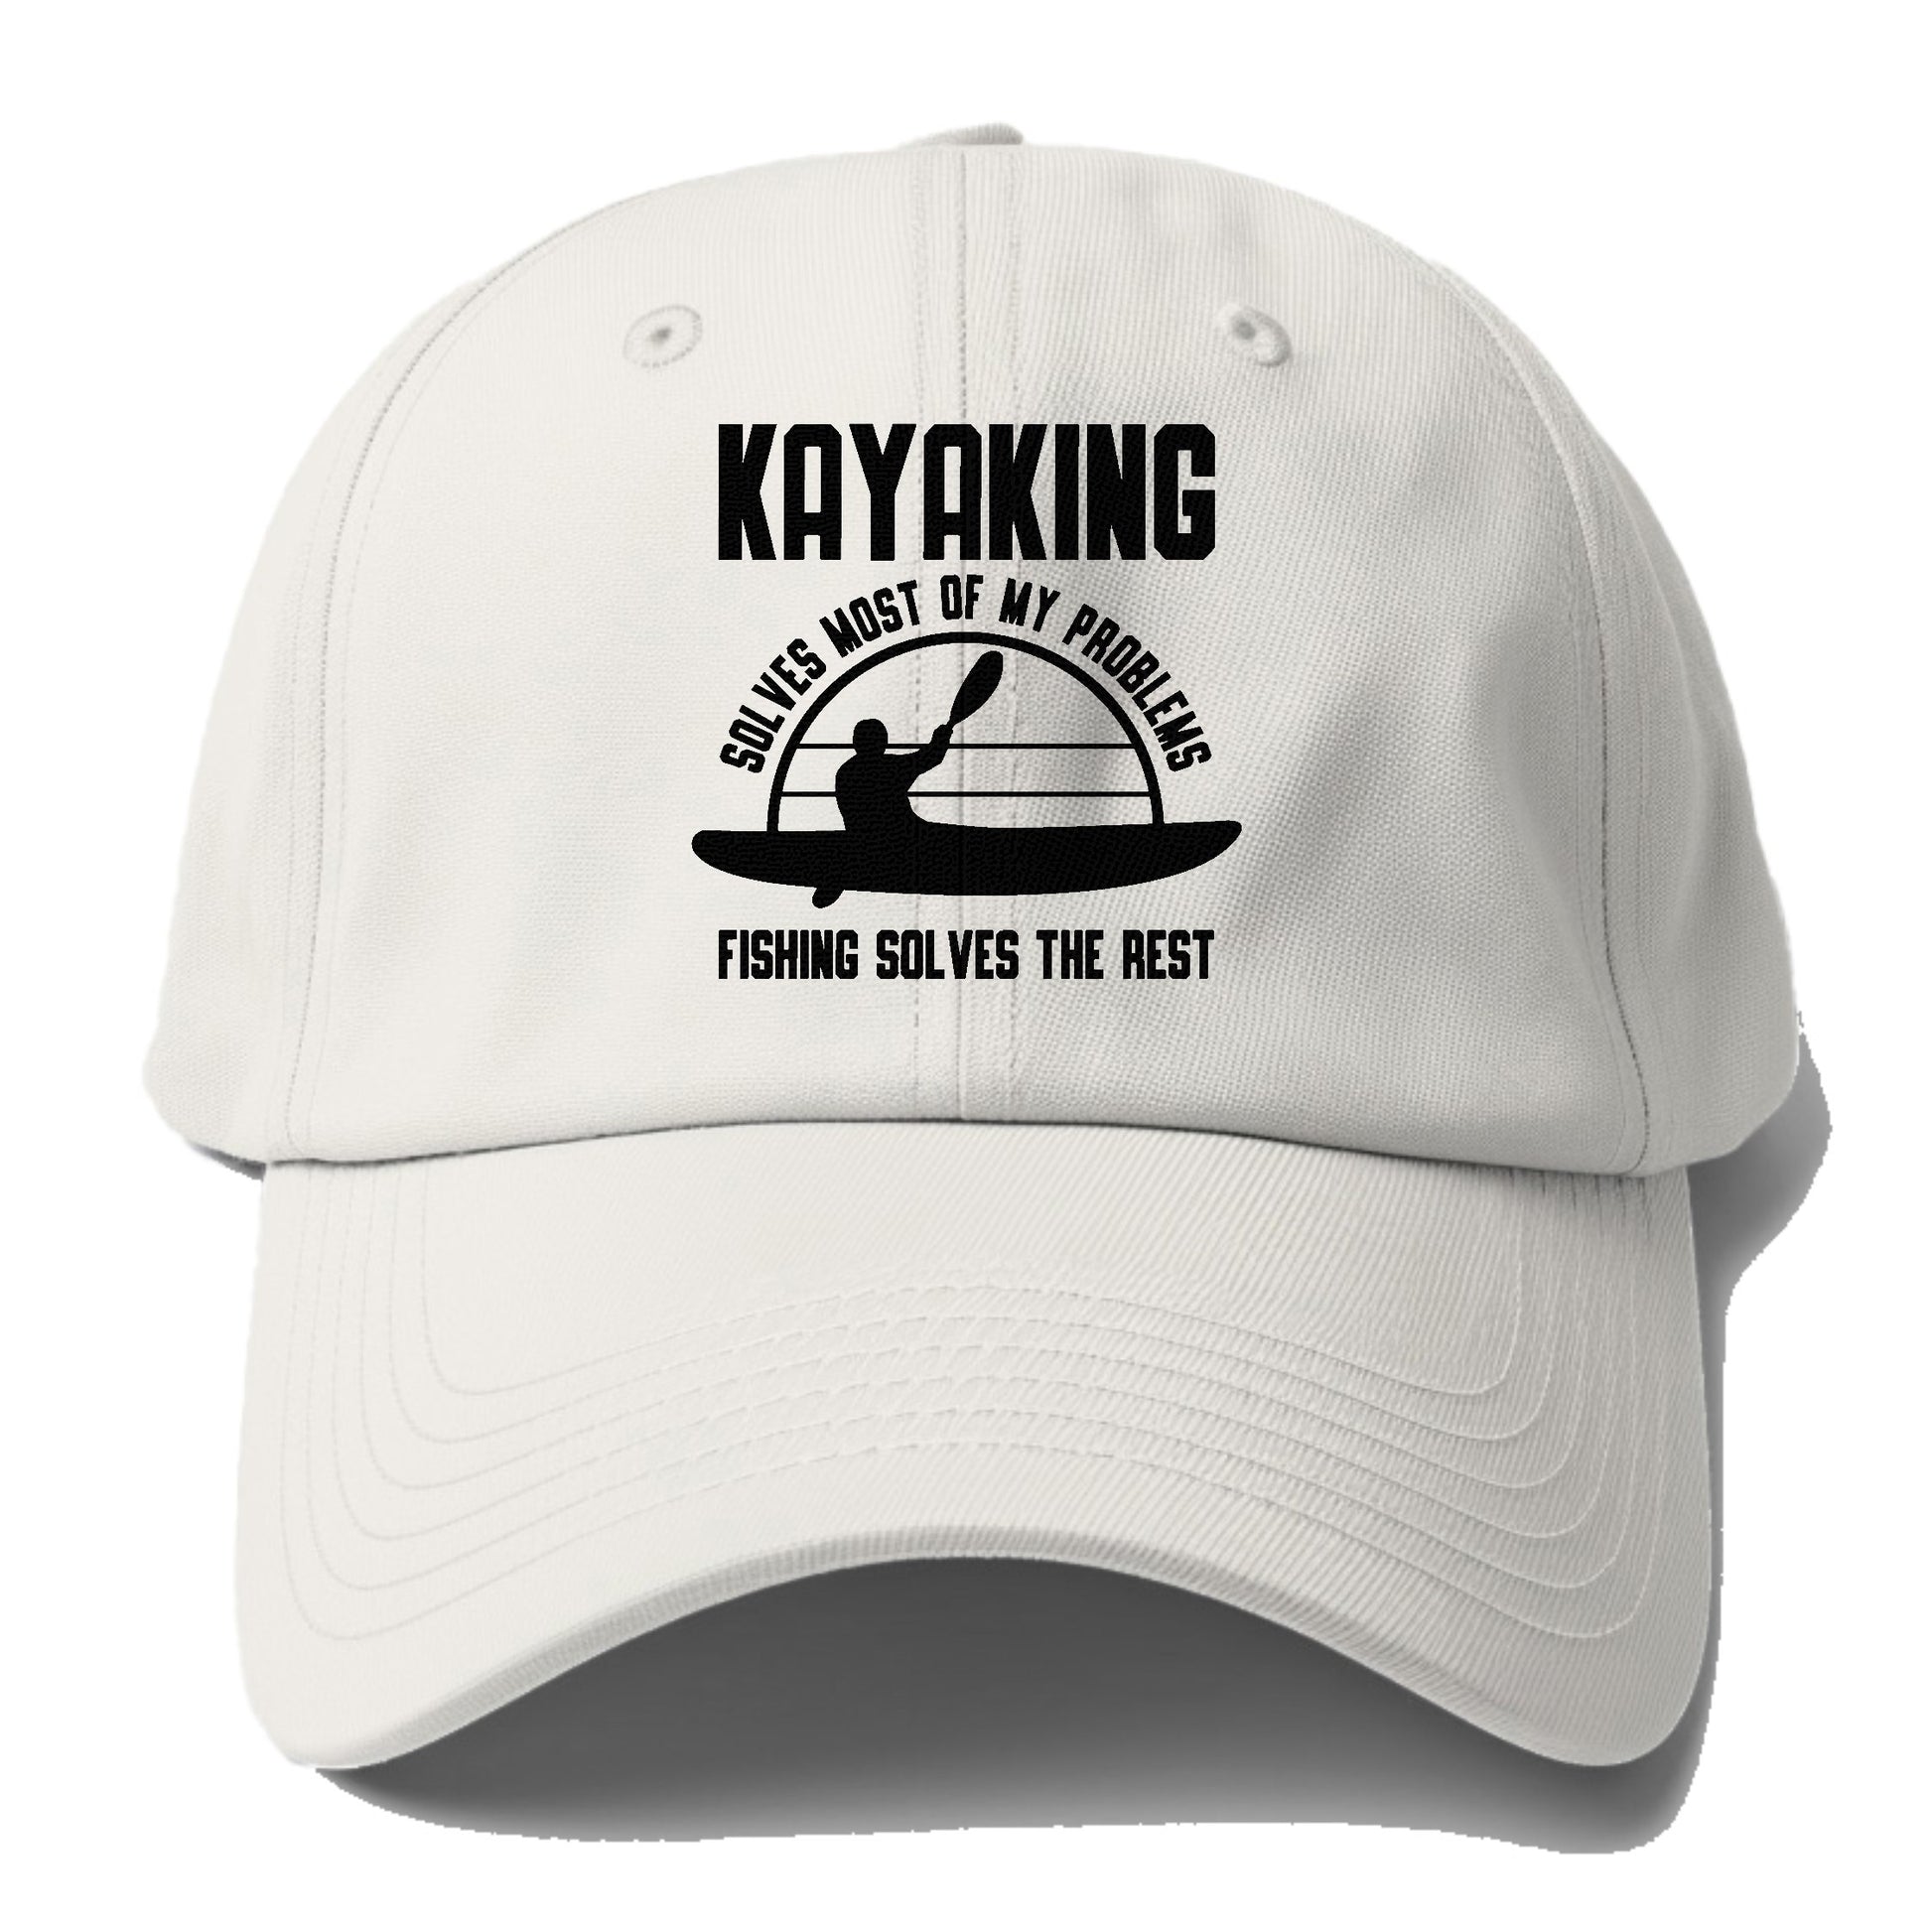 kayaking solves most of my problems, fishing solves the rest Hat